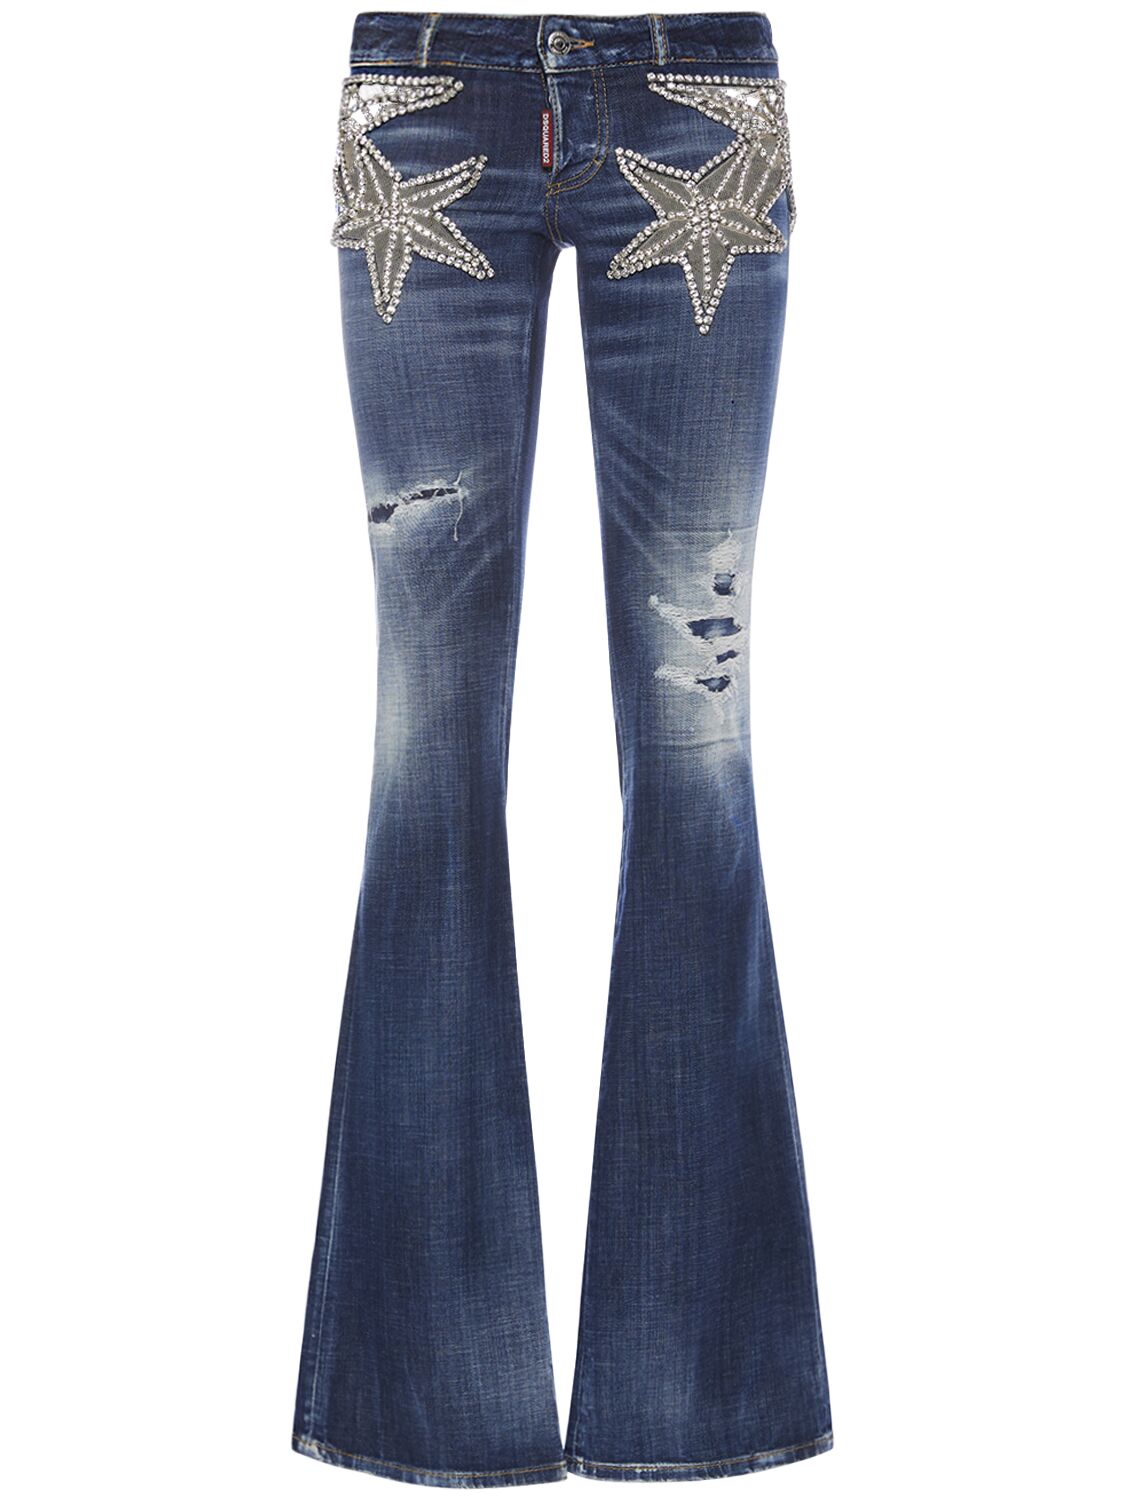 Embroidered Stars Low Rise Flared Jeans